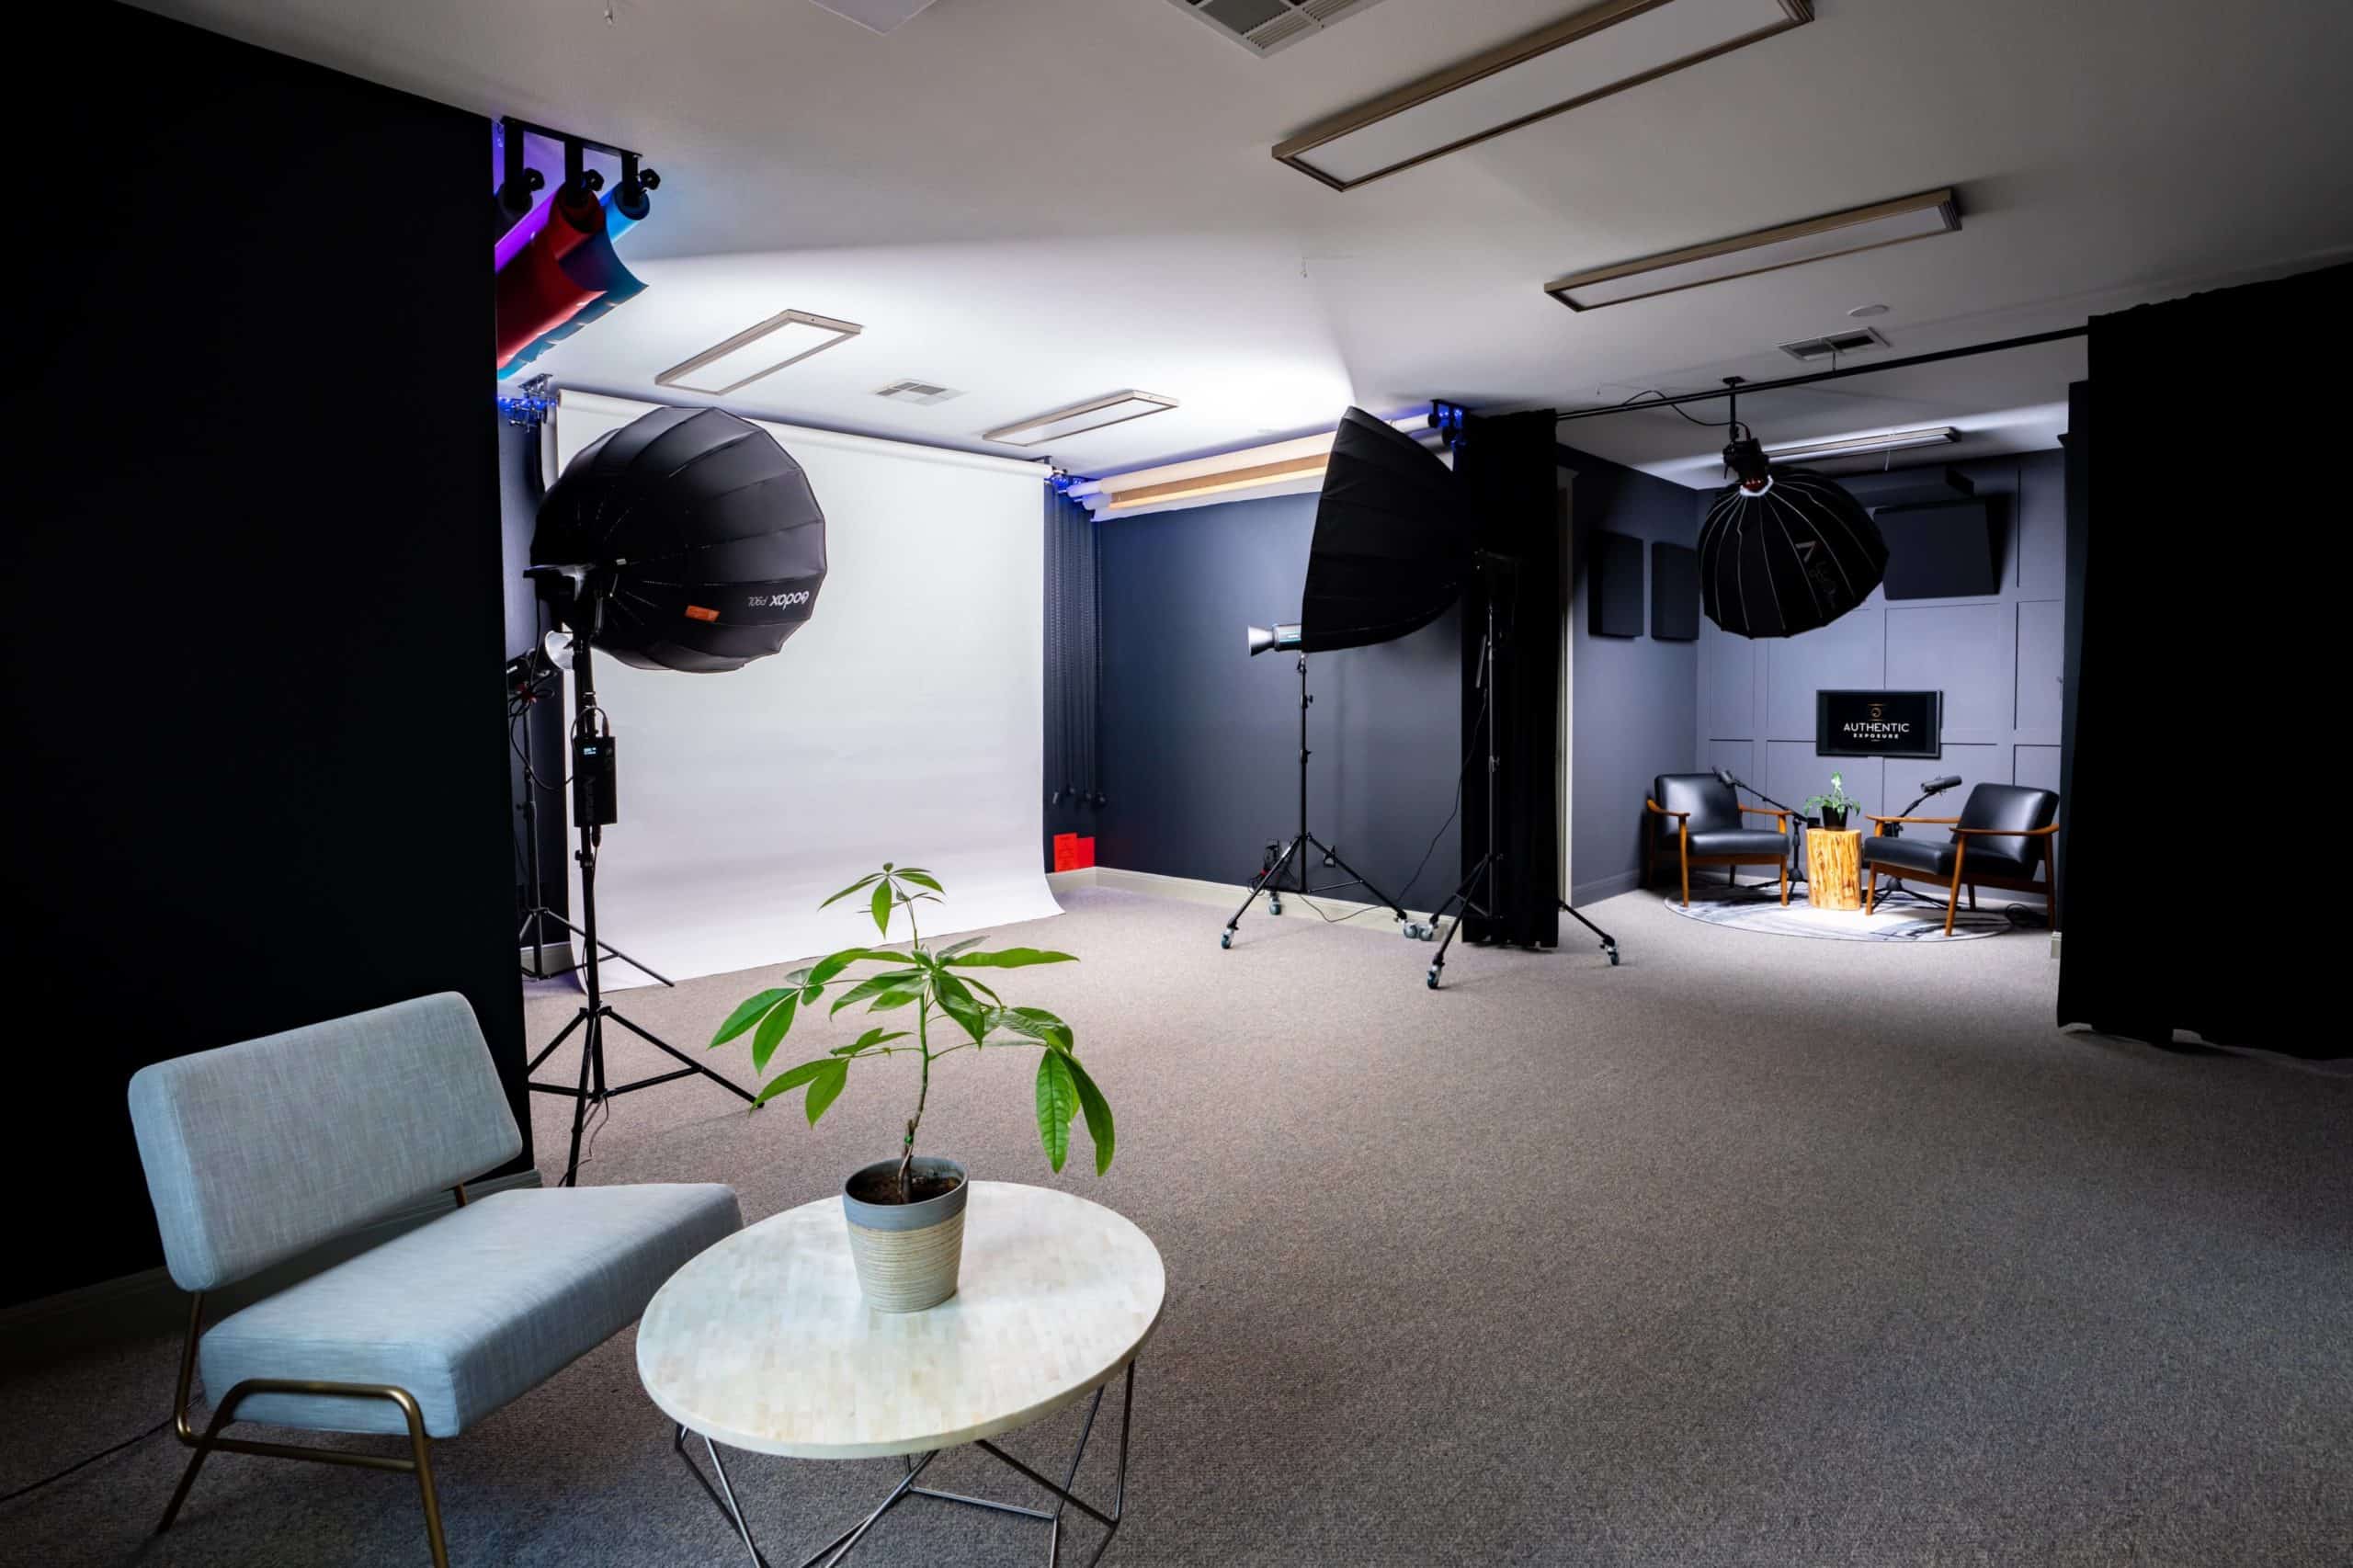 How much does a music video studio cost to rent